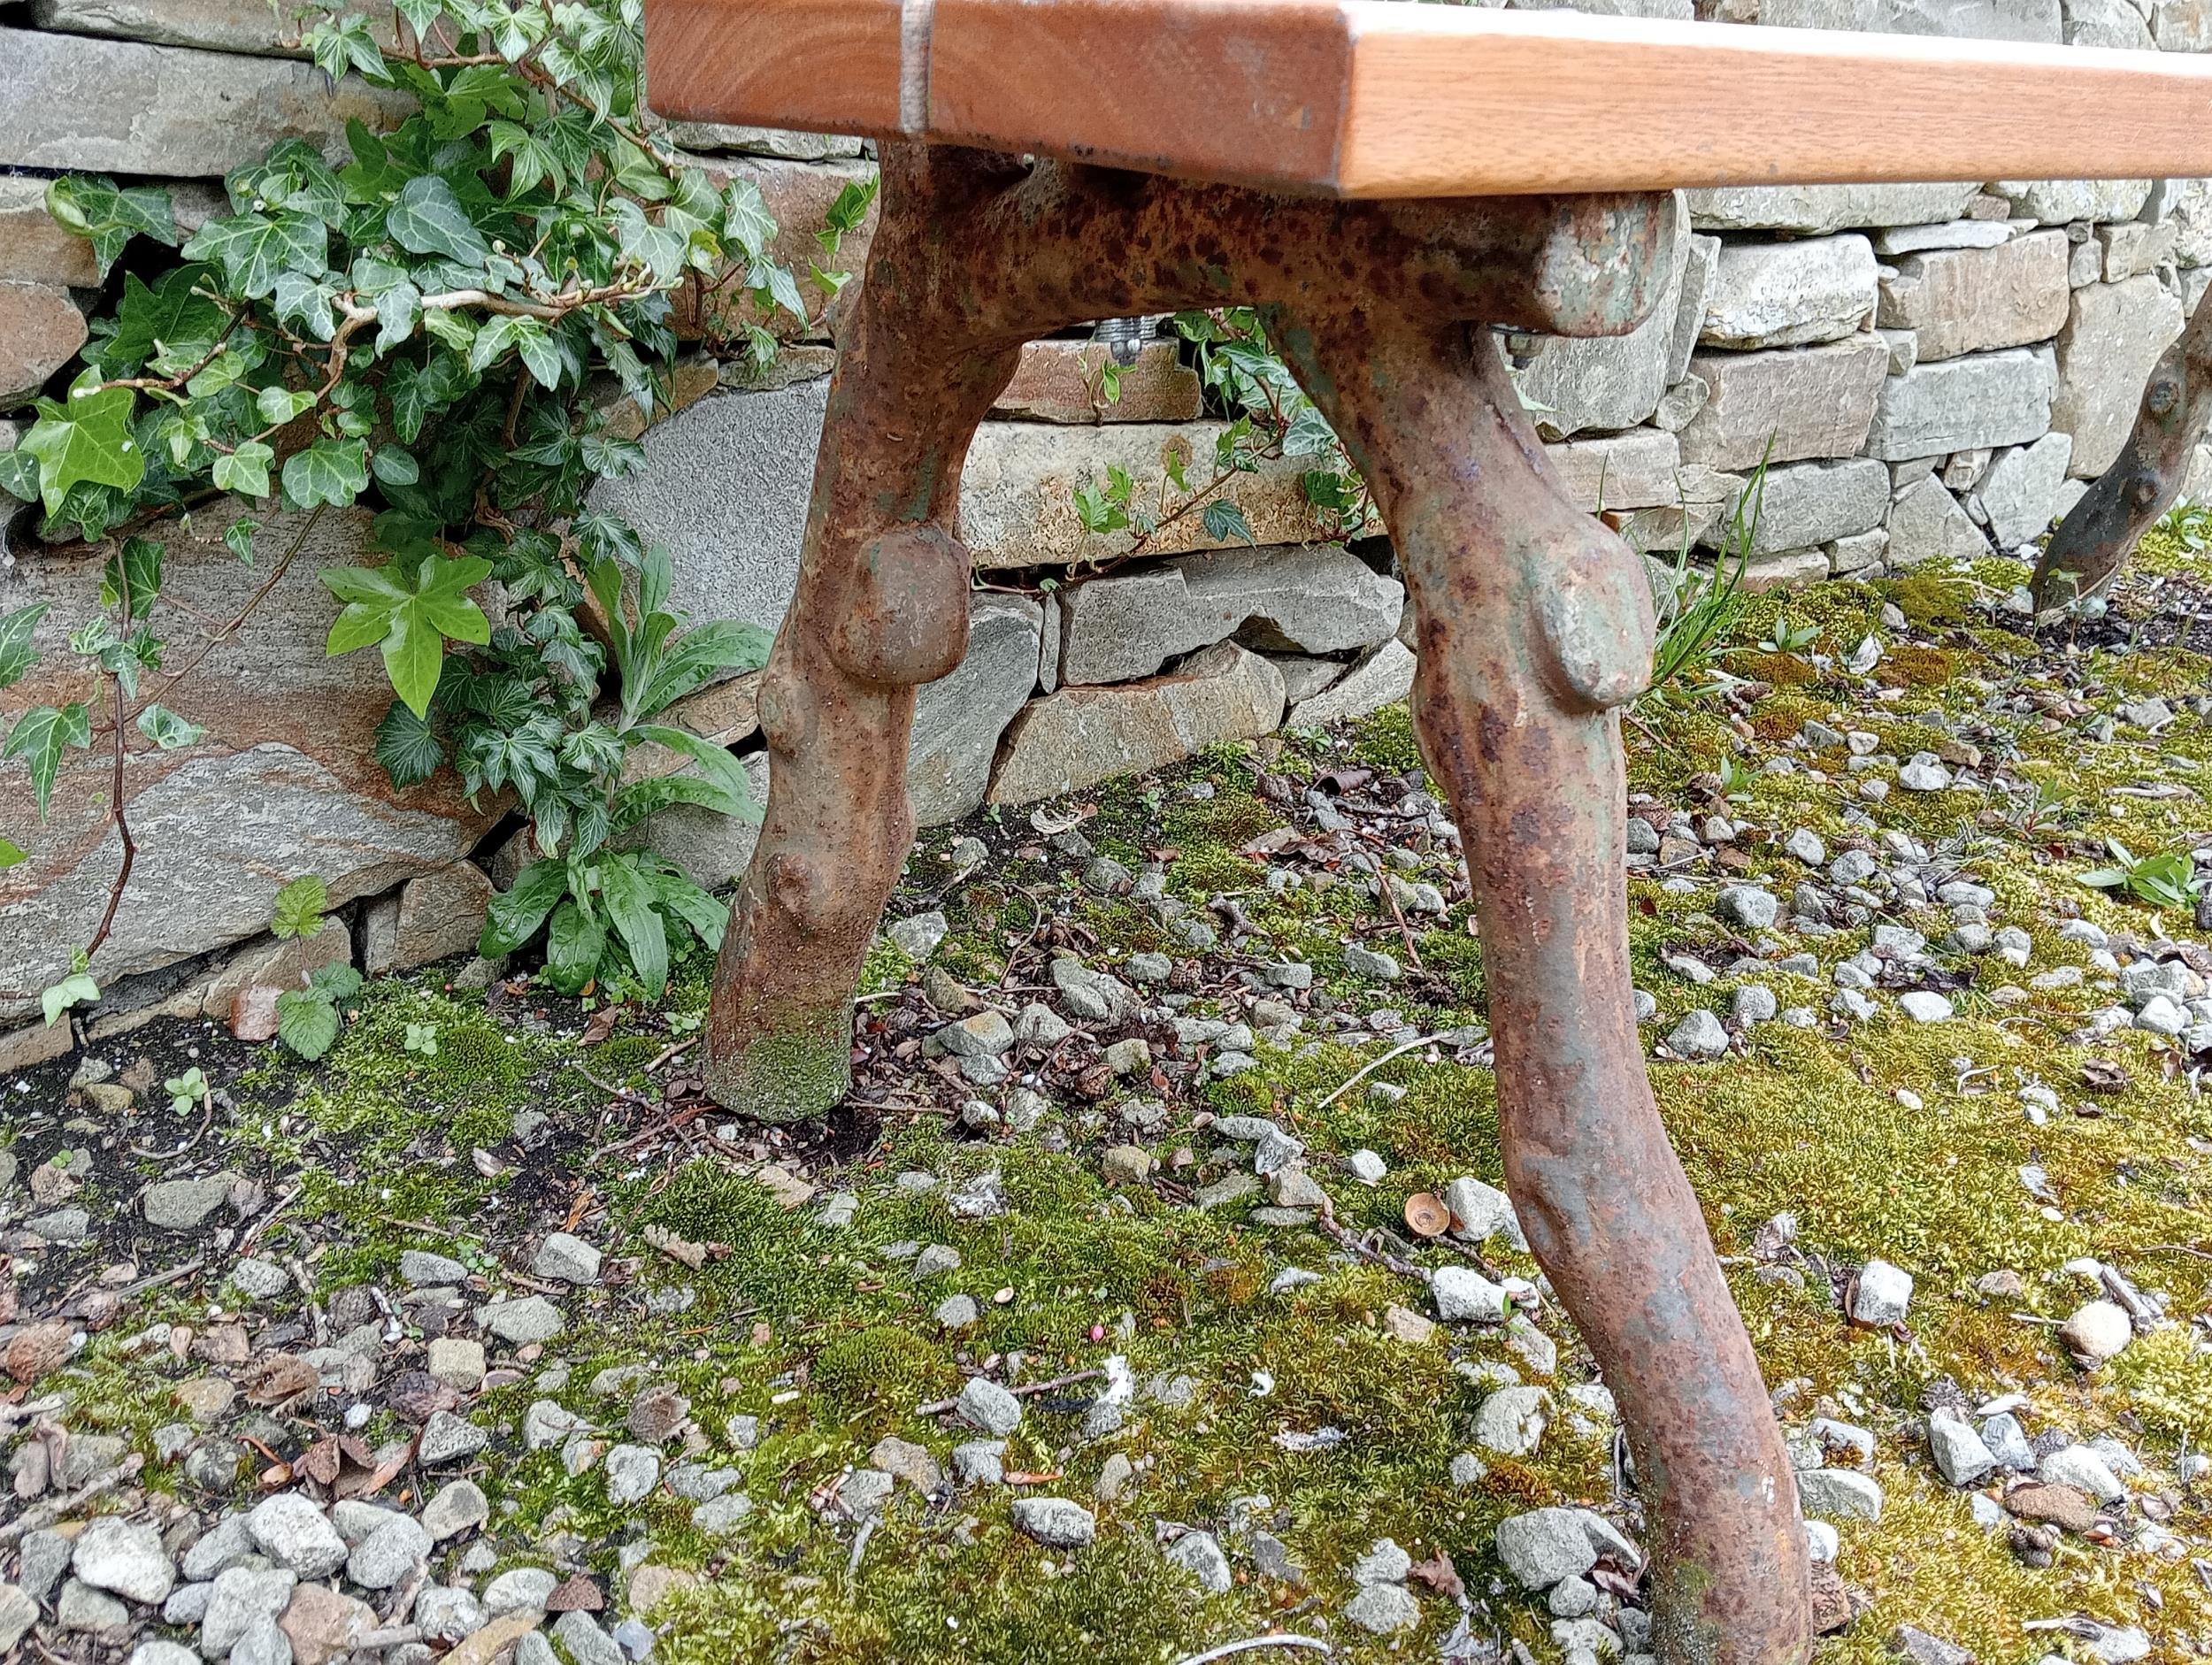 Cast iron rustic bramble bench with wooden slats {H 85cm x W 155cm x D 50cm}. (NOT AVAILABLE TO VIEW - Image 3 of 4